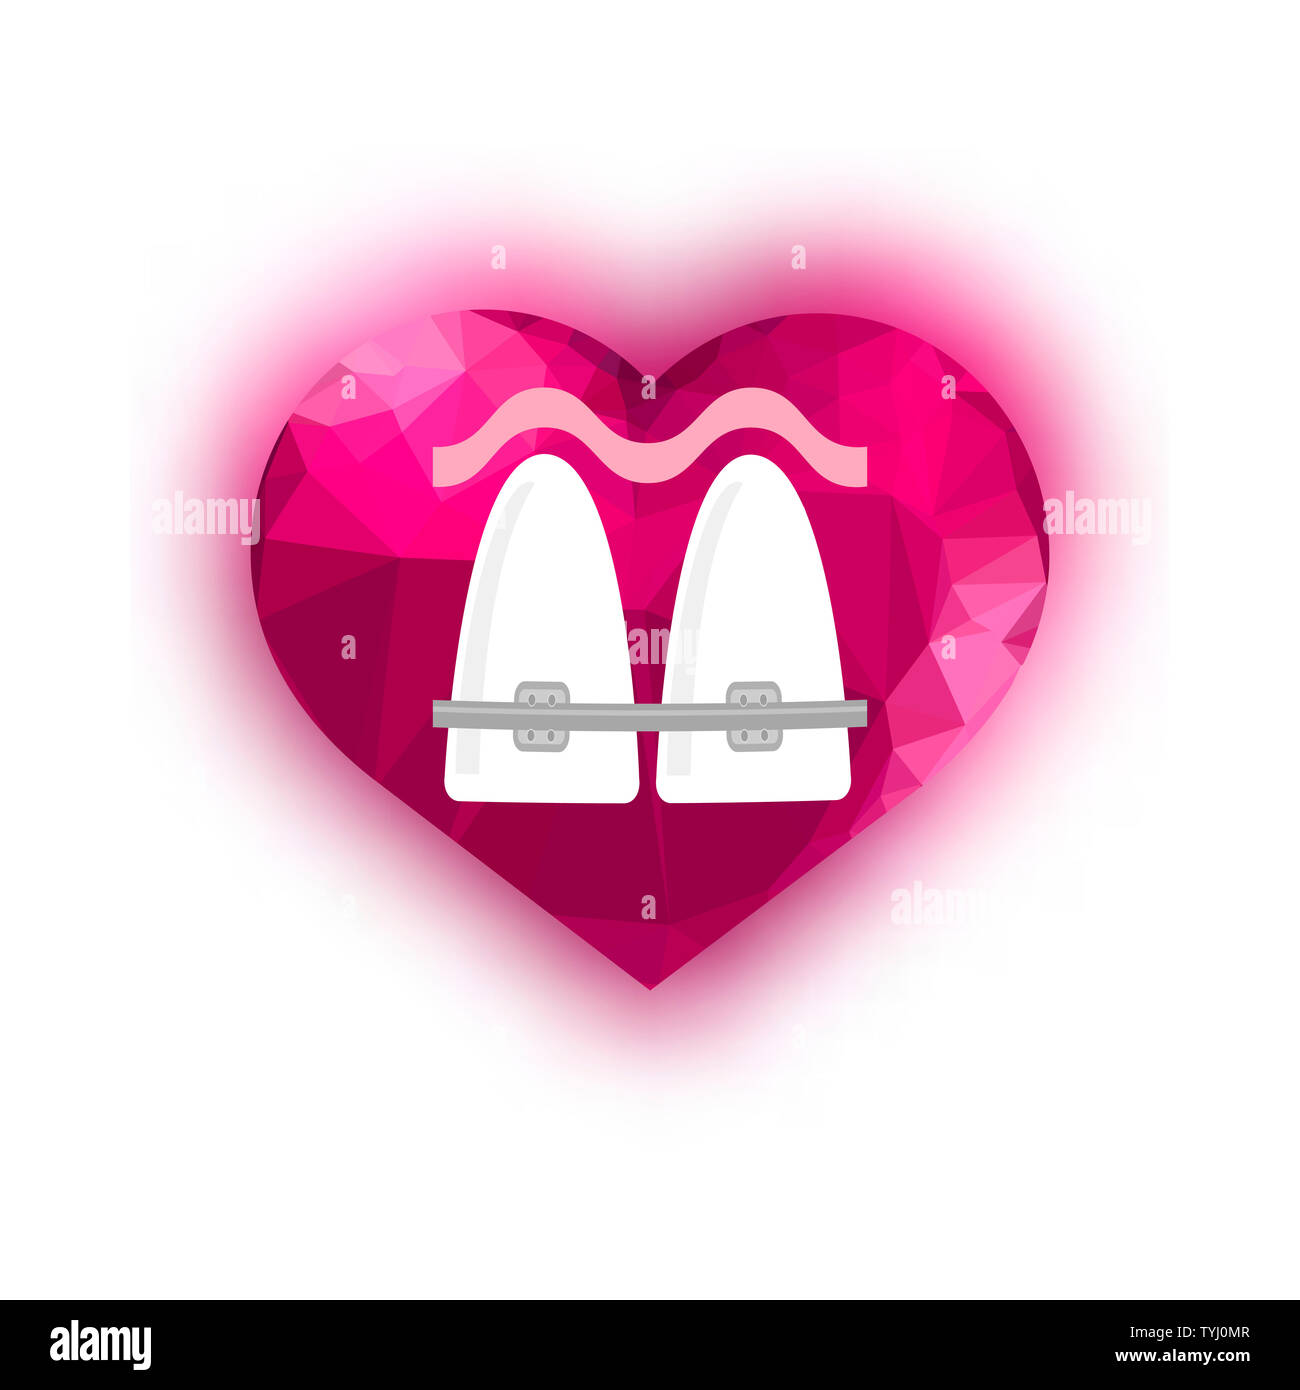 Medical Braces Teeth Icon with Pink Heart. Dental Care Background. Orthodontic Treatment Stock Photo